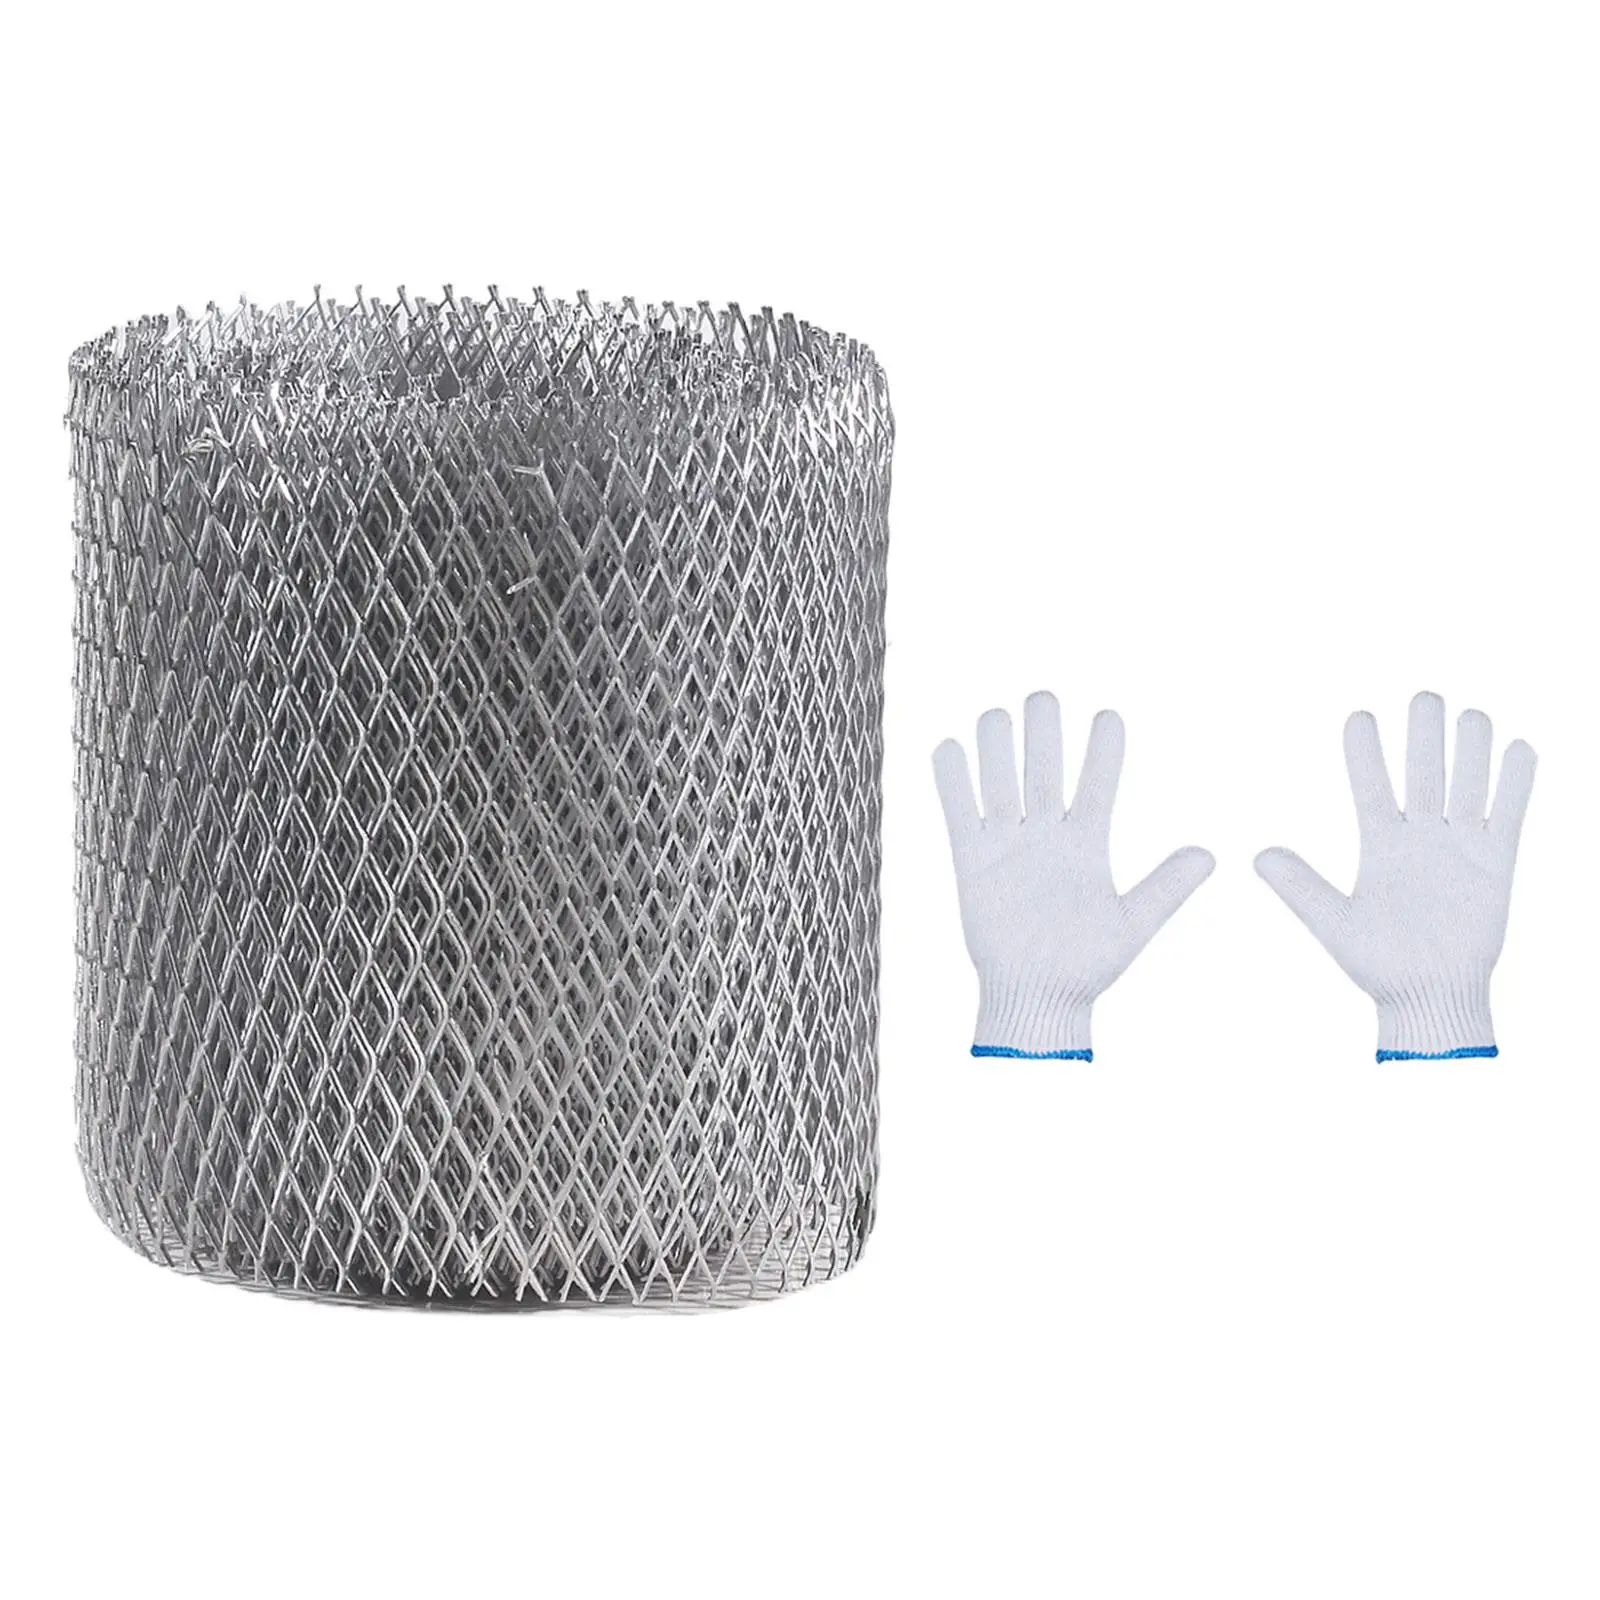 Gutter Guard Mesh Practical Leaf Prevention Flexible for Home Downpipe Parts